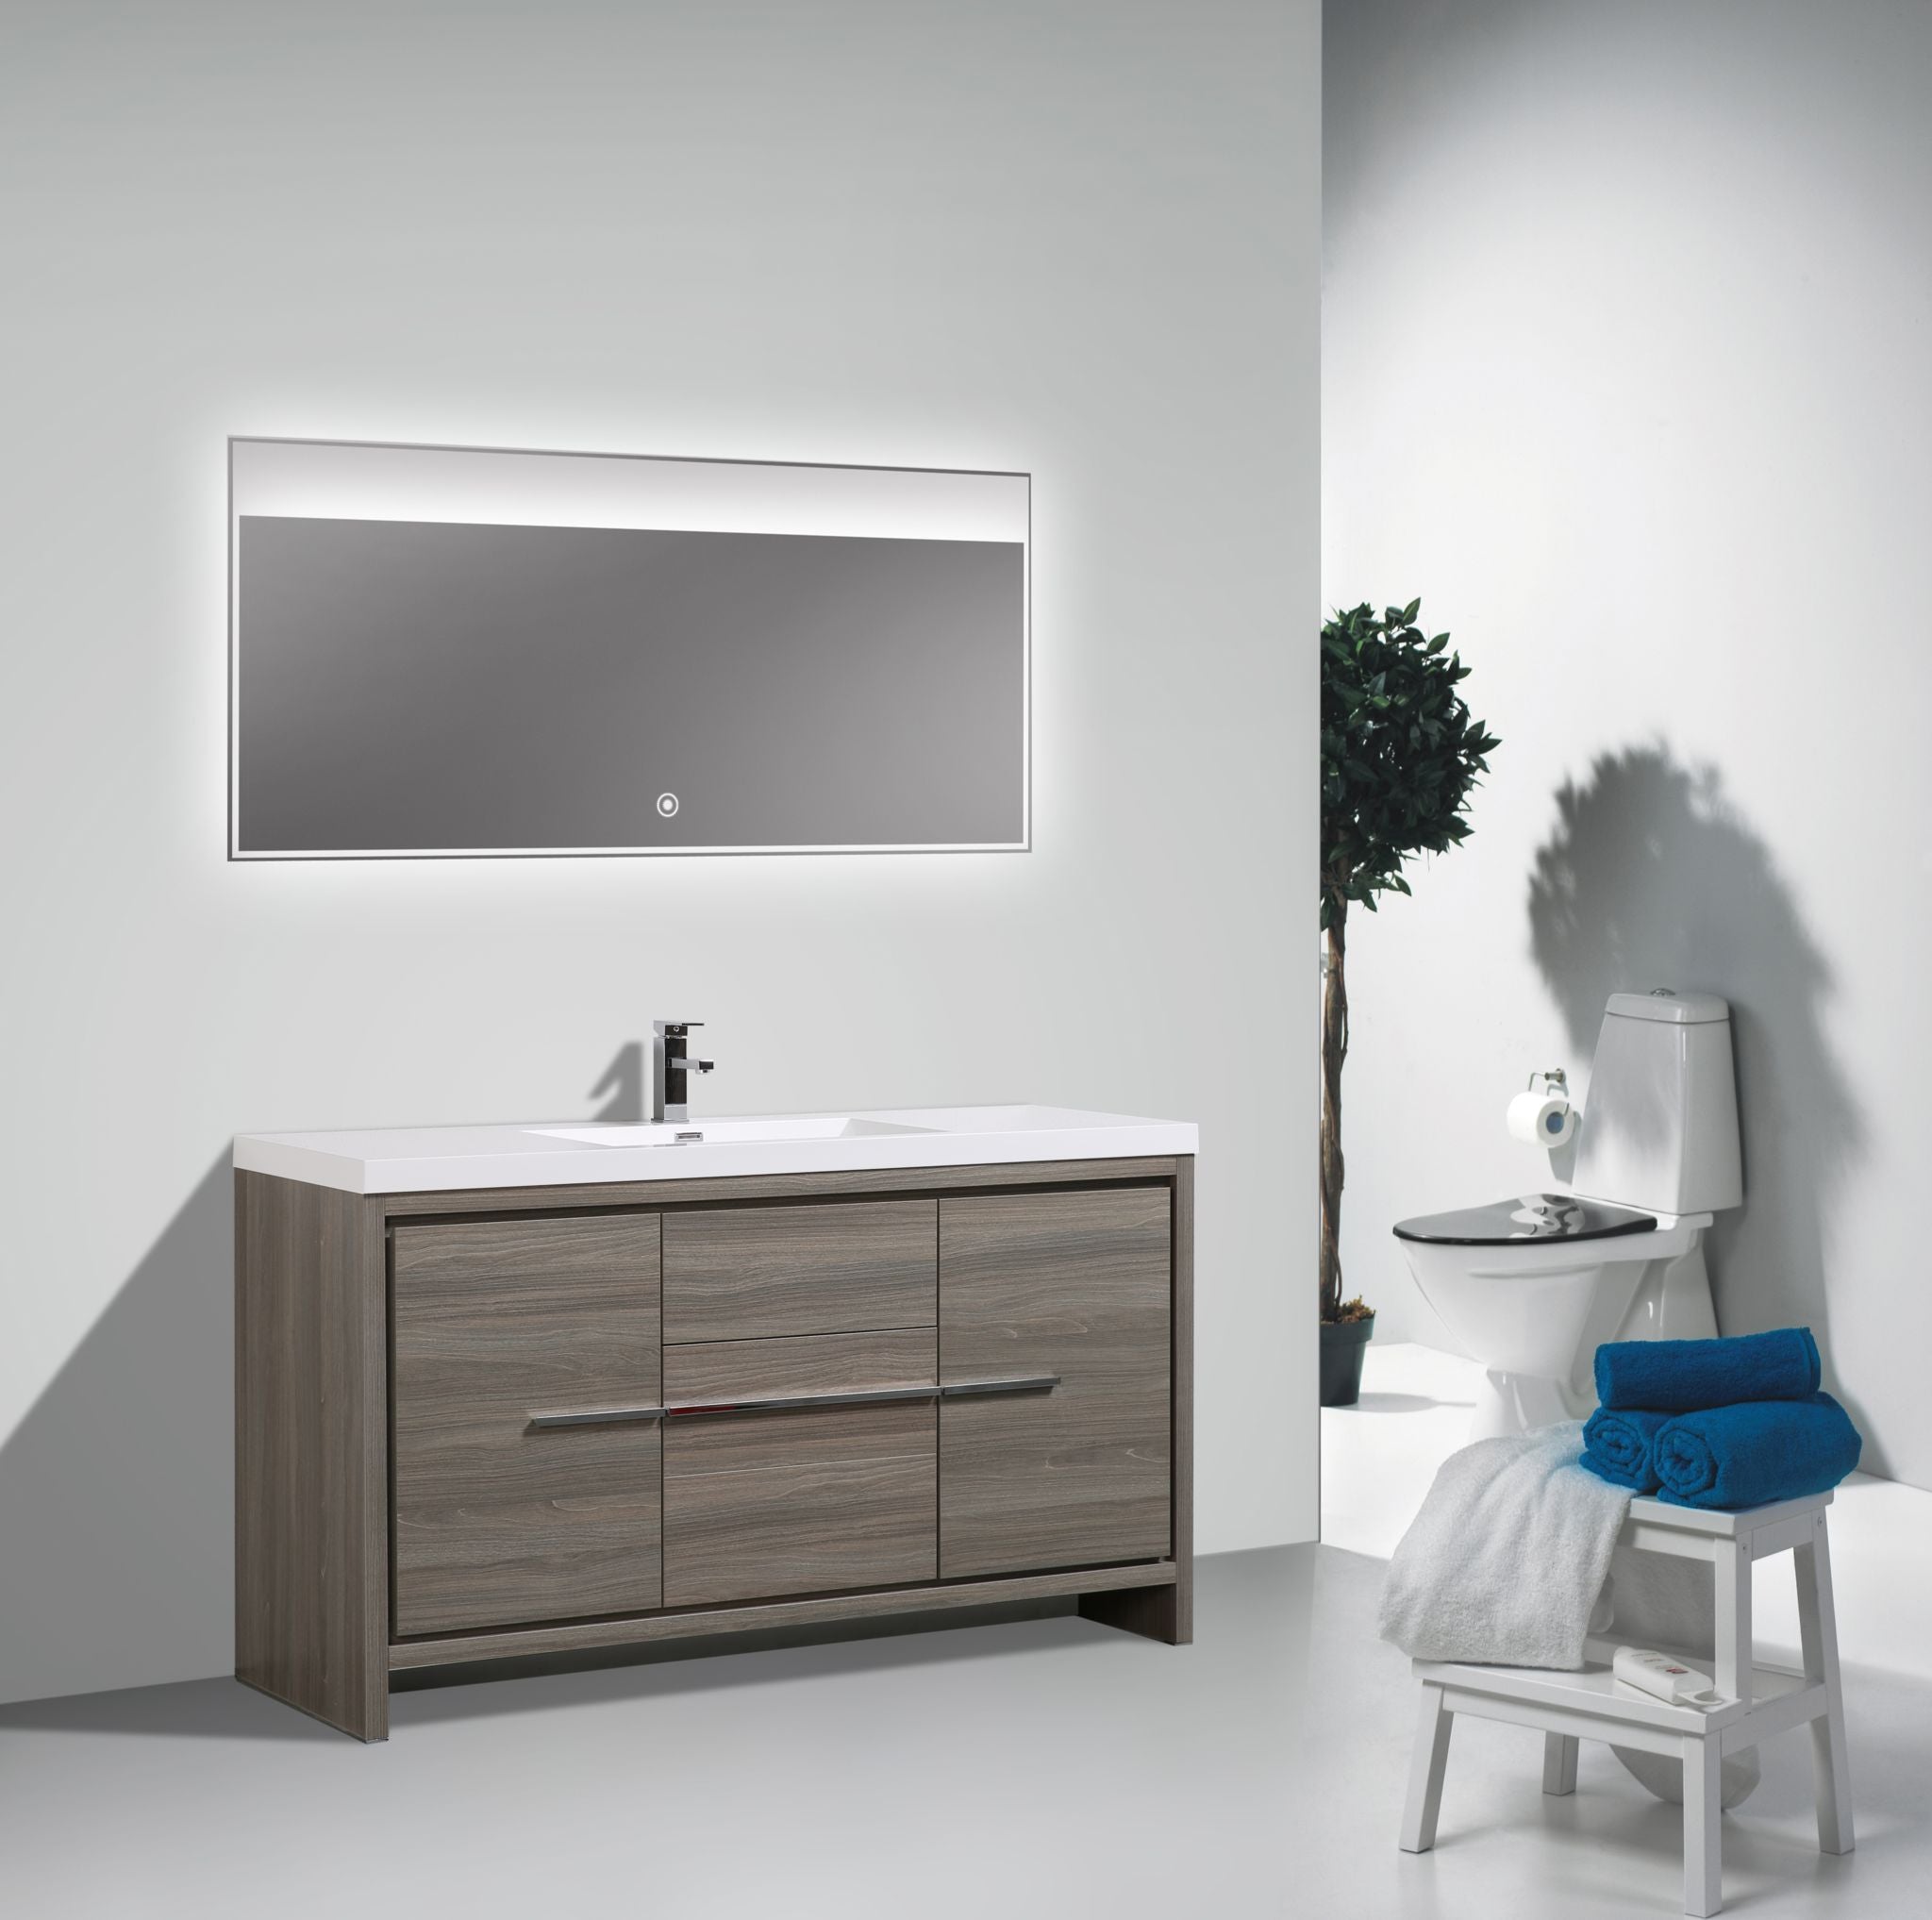 Granada 59 Maple Grey With Chrome Handle Cabinet, Square Cultured Marble Single Sink, Free Standing Modern Vanity Set